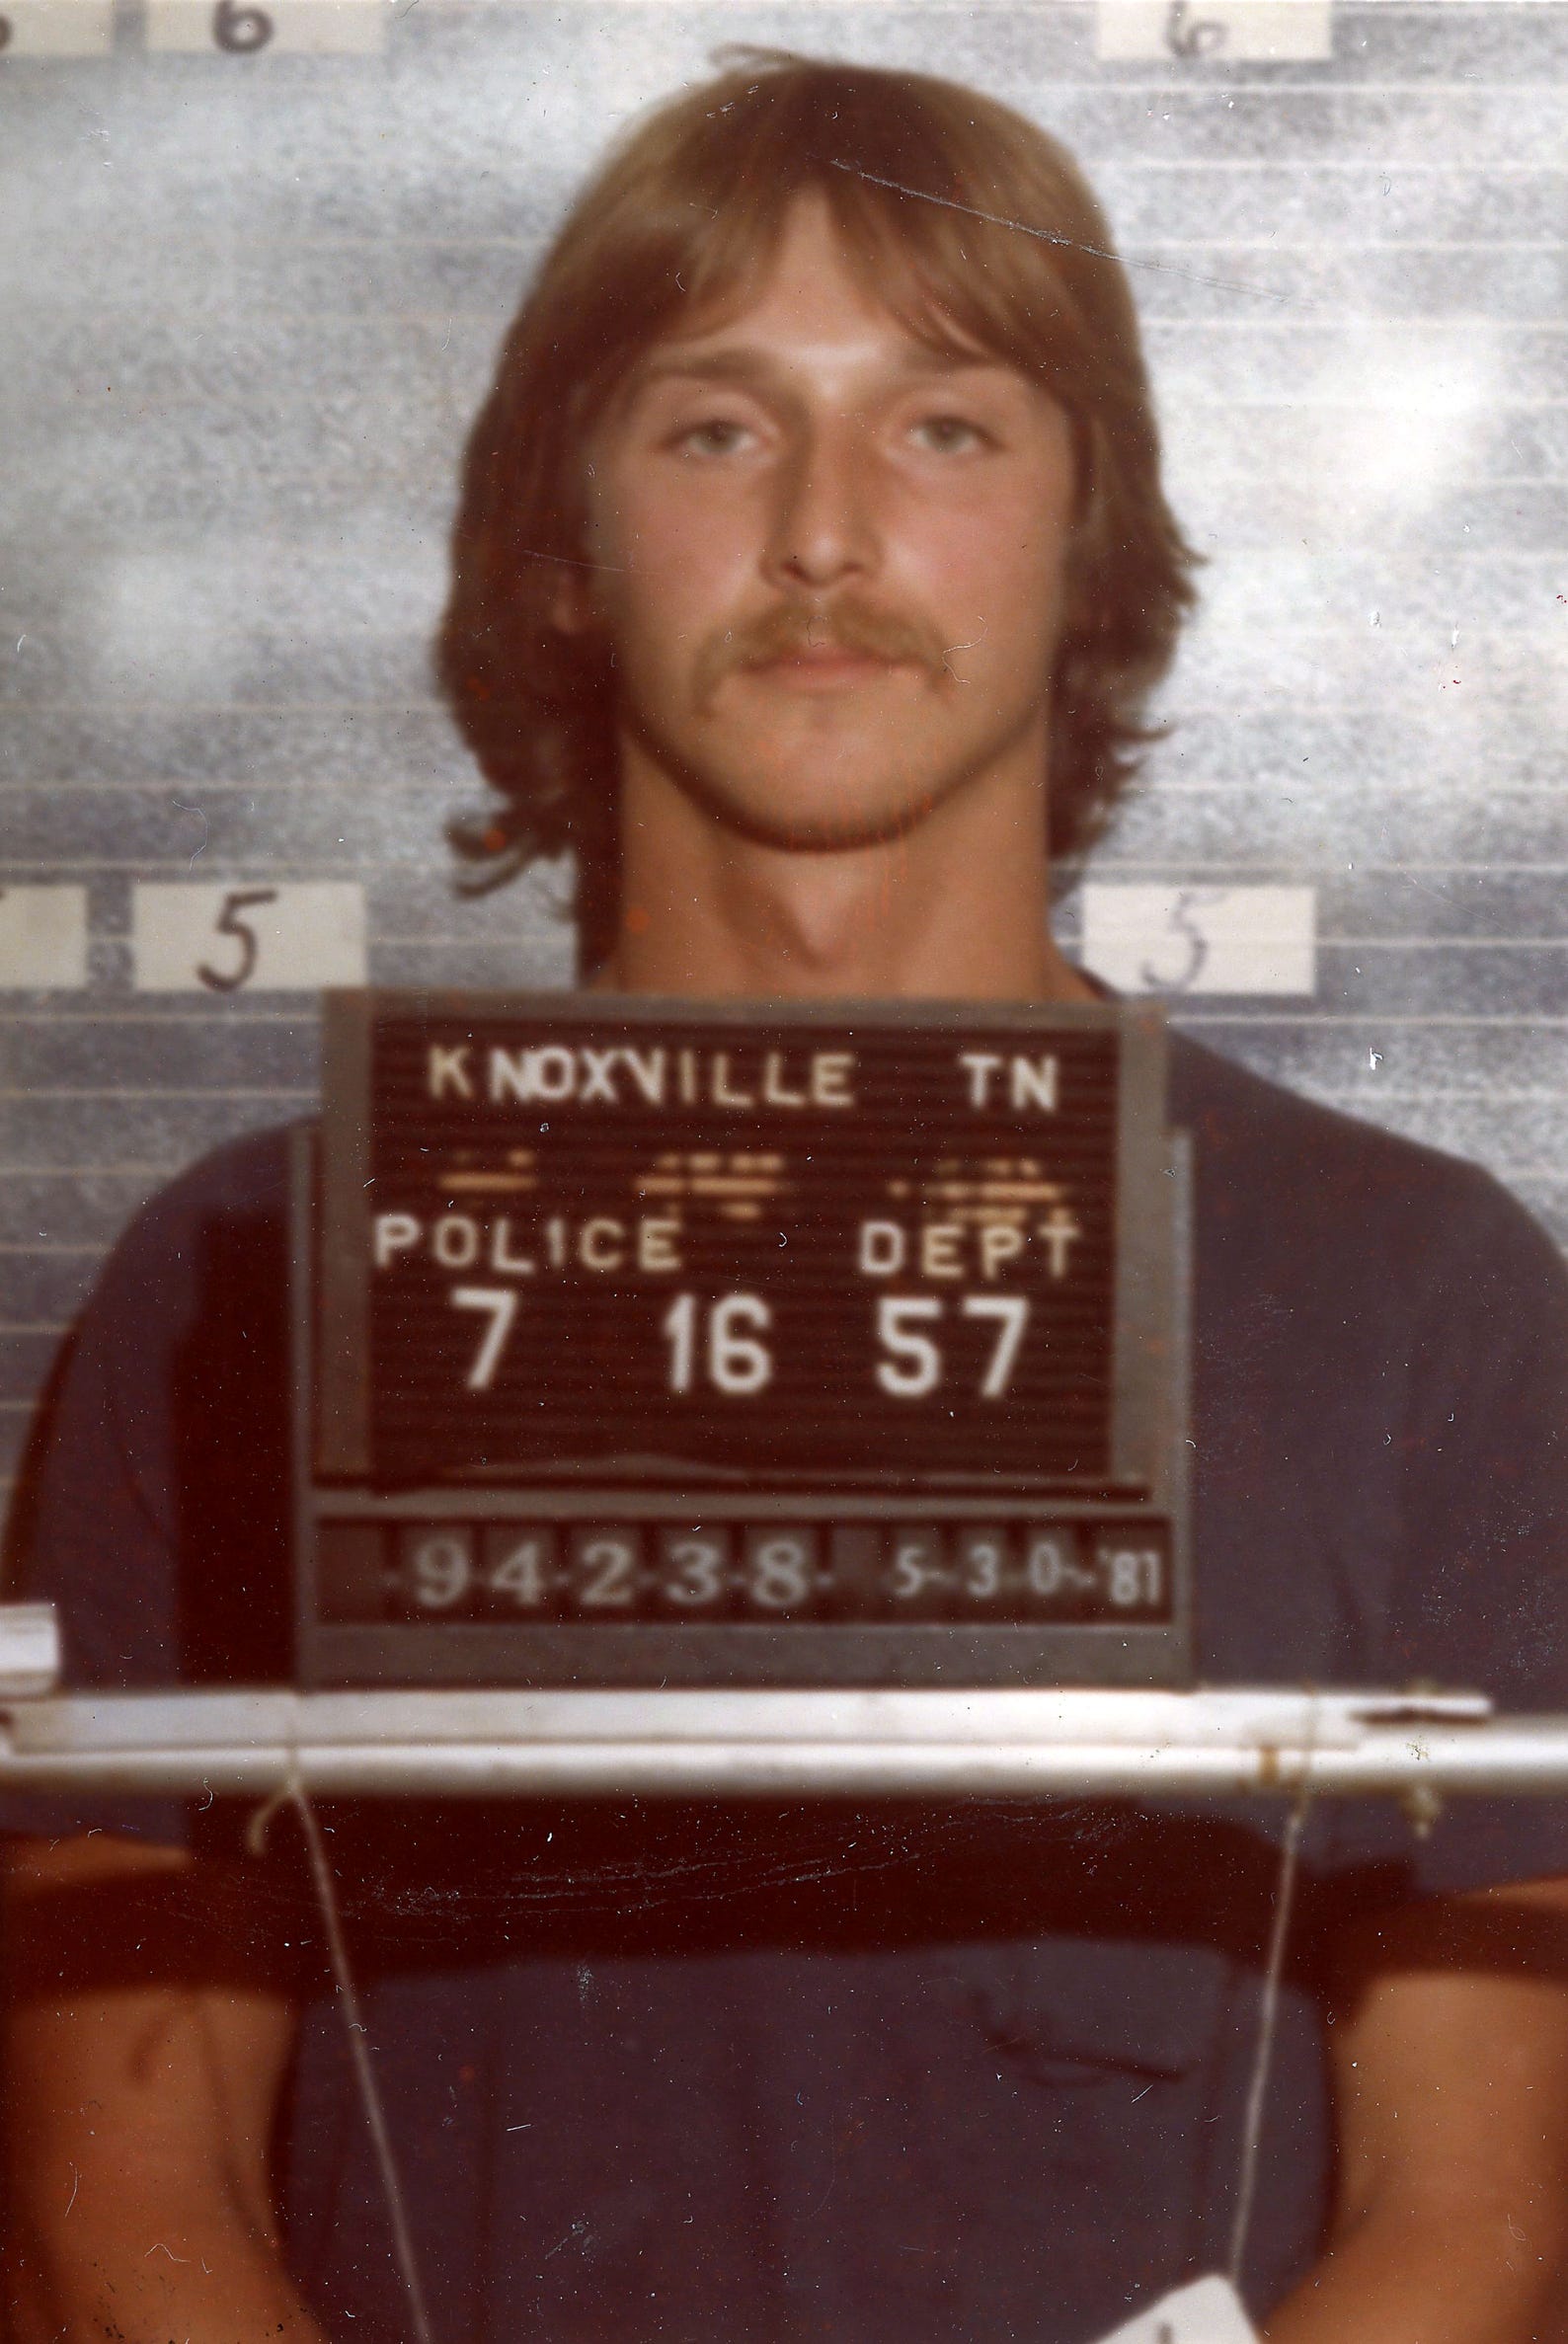 David Earl Miller, scheduled to die Dec. 6, 2018, for killing Lee Standifer in South Knoxville in May 1981.